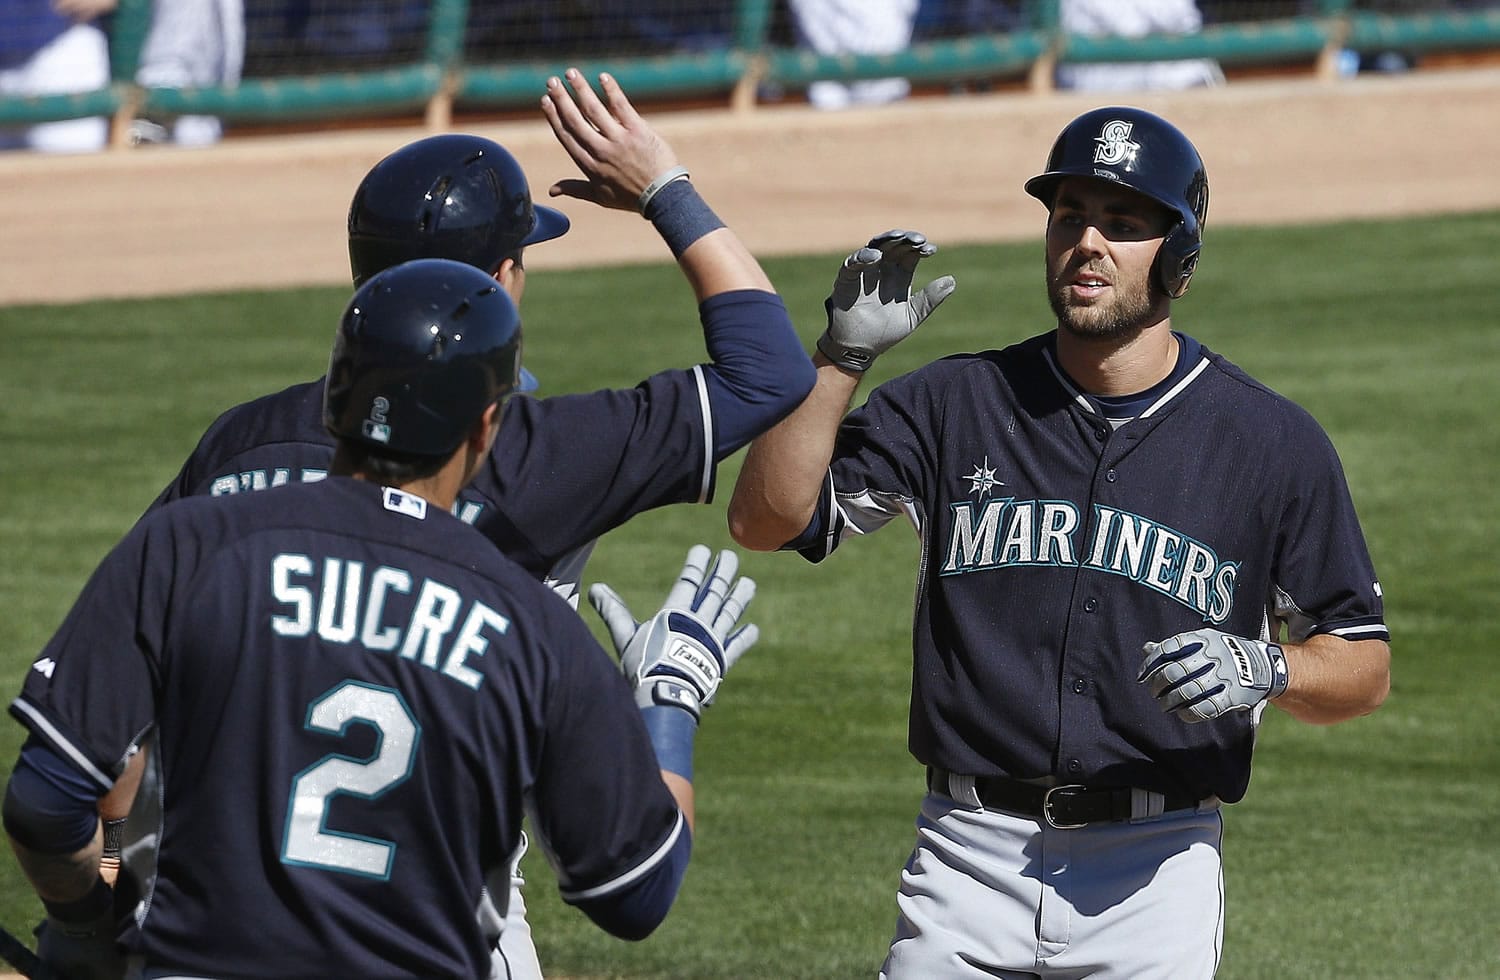 Seattle Mariners' Chris Taylor, right, is congratulated by teammates Jesus Sucre (2) and Shawn O'Malley as Taylor crosses home plate after hitting a home run in the fifth inning of a spring training game against Los Angeles Dodgers, on Friday, March 6, 2015, in Phoenix.